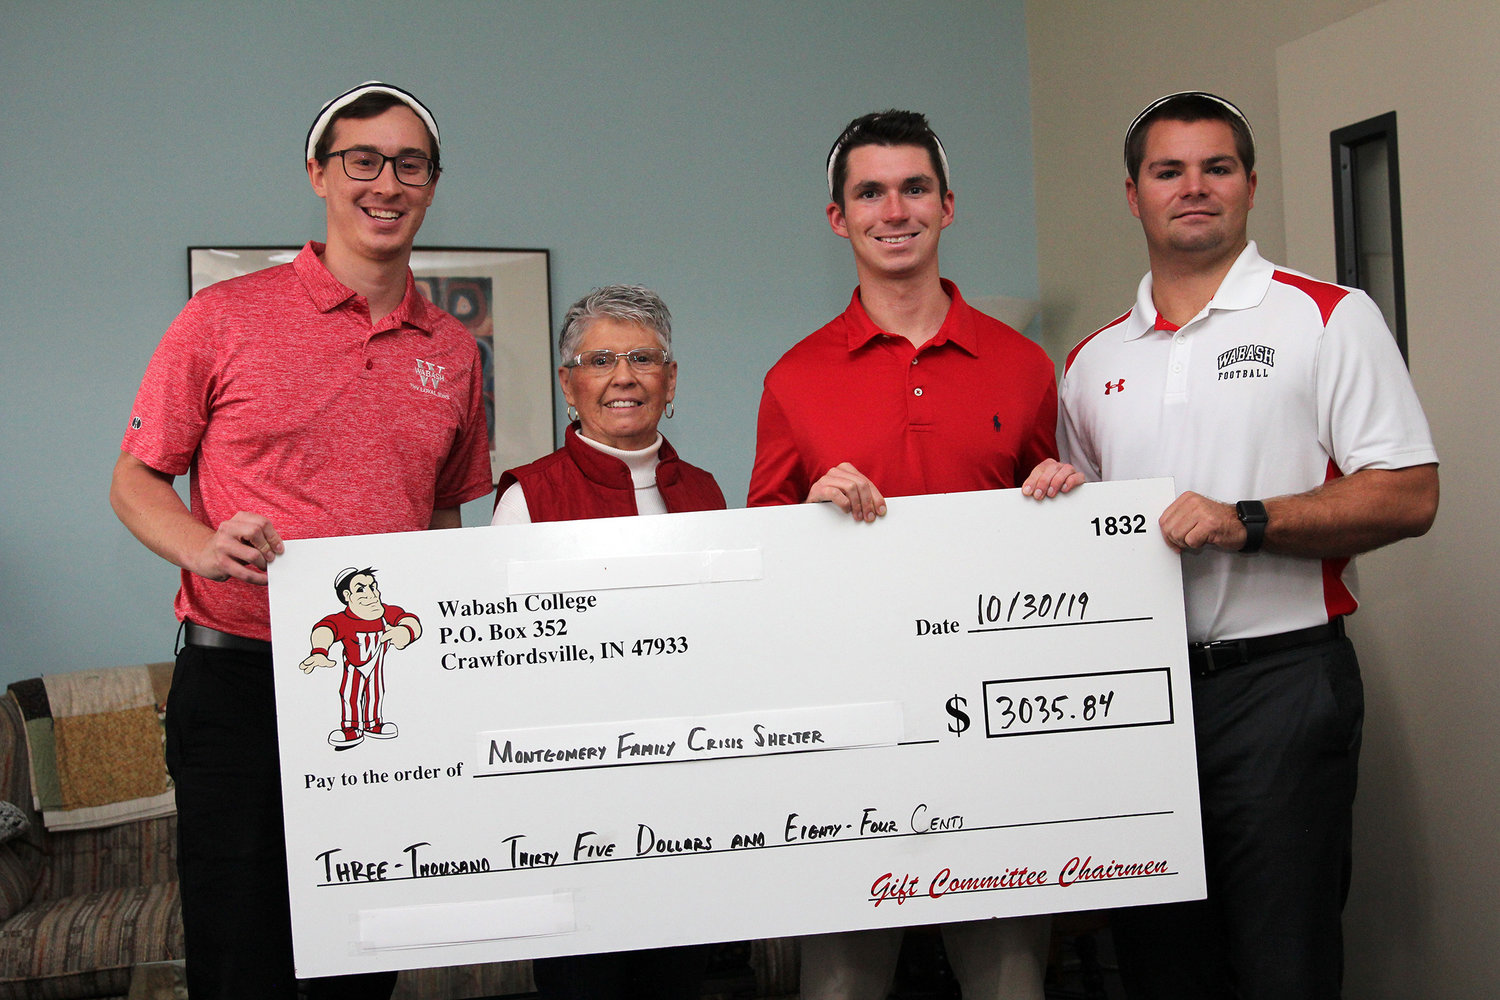 Wabash College's Sphinx Club presented a more than $3,035 donation to the Montgomery County Family Crisis Shelter. The funds were collected during Homecoming weekend. Pictured from left are senior Clark Tinder; Sharon Strasburger, Montgomery County Family Crisis Shelter administrative assistant; senior Matt Fagt; and senior Charlie Brewer. “This donation is wonderful,"  Strasburger said. "We’re low on funds right now because grant money is coming in more slowly than in previous years. This will do a lot for our shelter.” Tinder said, “It’s part of our mission to live humanely. We see the shelter as doing good work, so it’s a meaningful way to put money back into the community and provide some immediate support.”